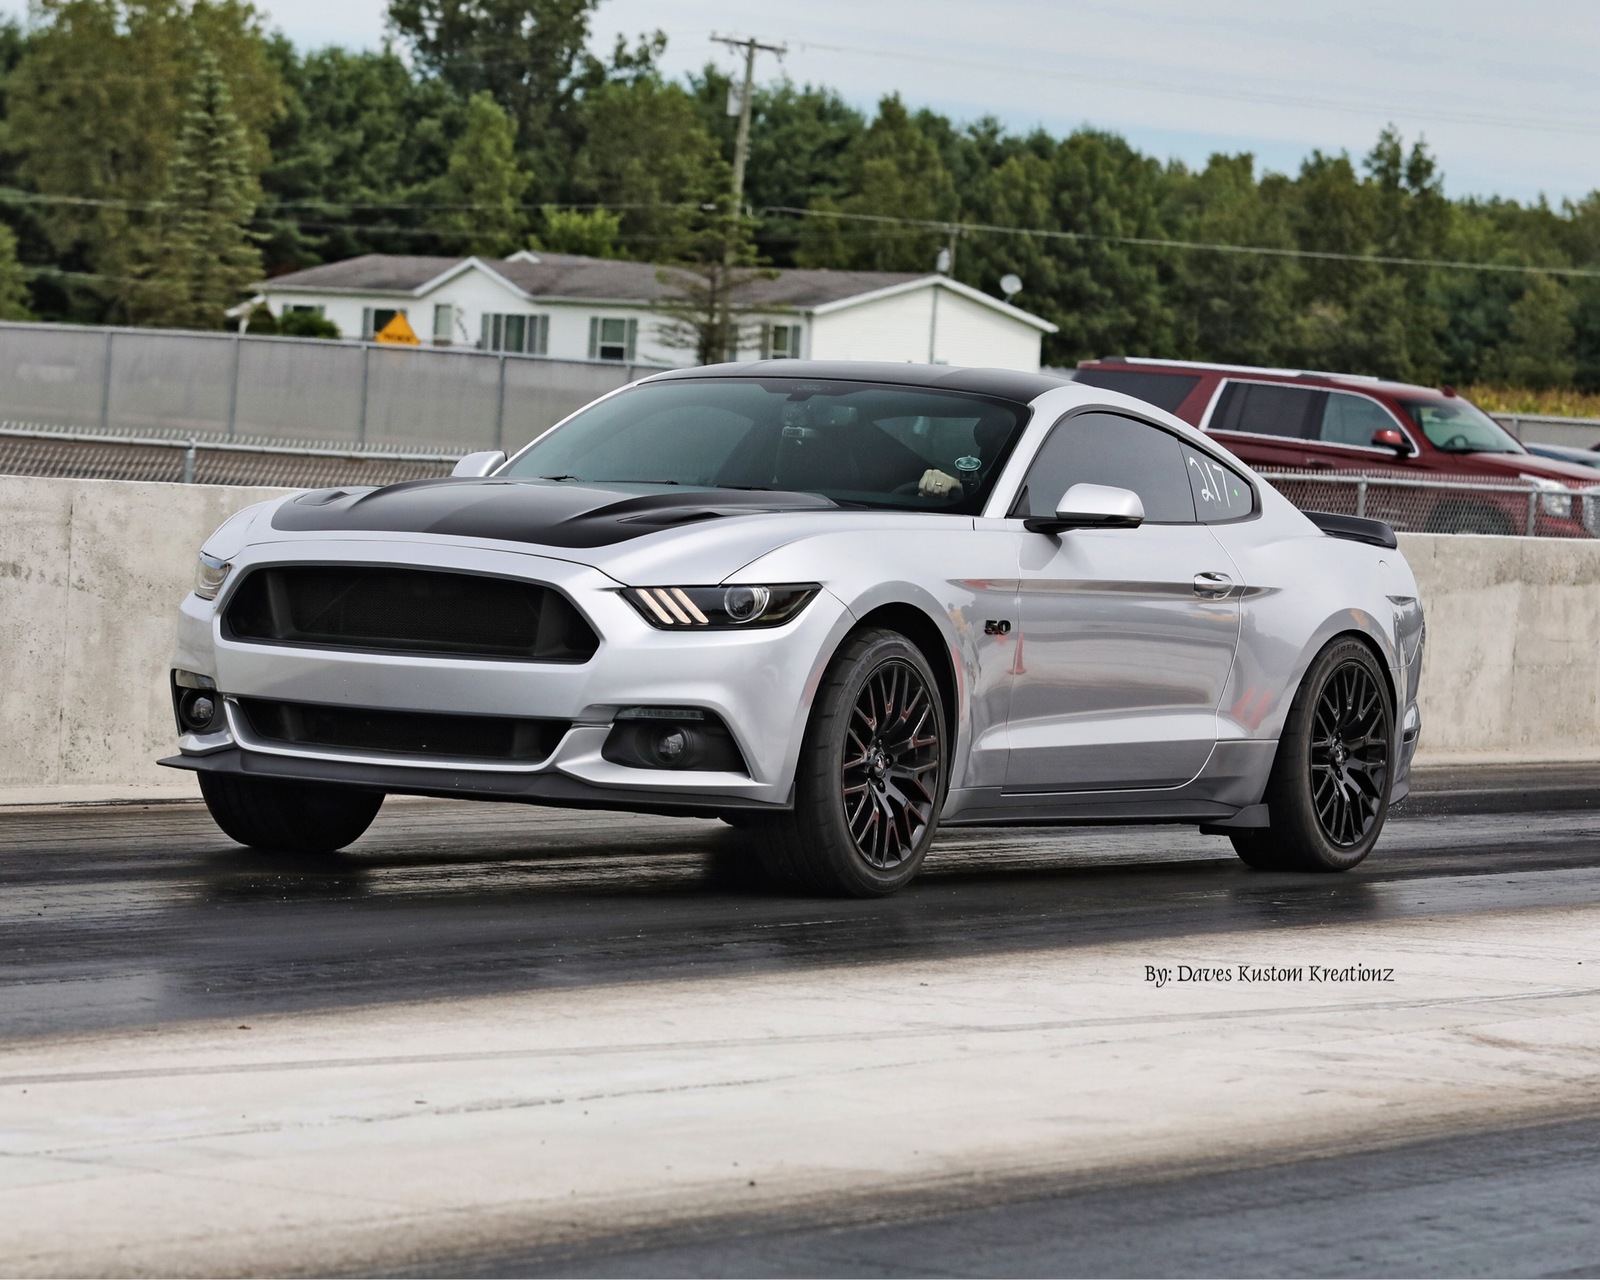 2016 Ford Mustang GT 1/4 mile trap speeds 0-60 - DragTimes.com